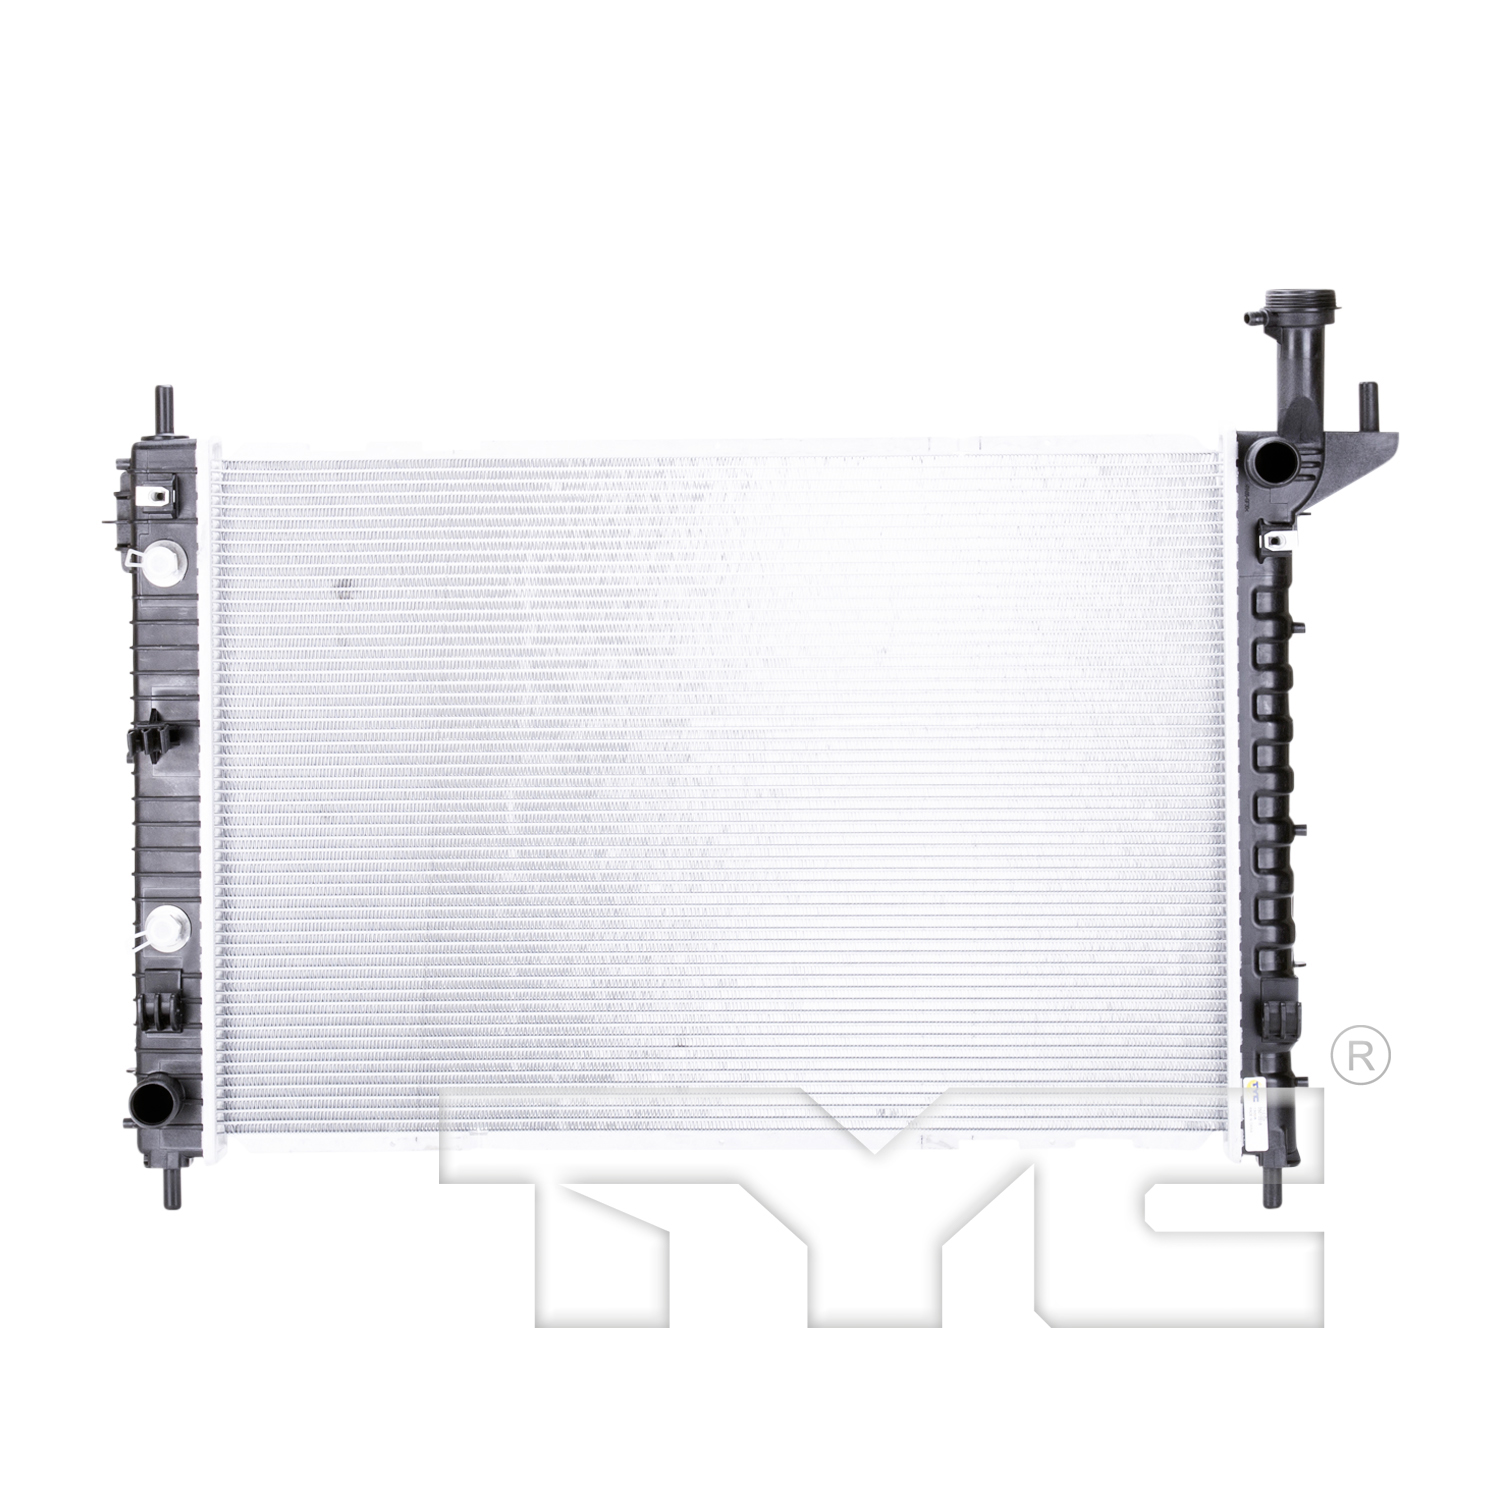 Aftermarket RADIATORS for GMC - ACADIA LIMITED, ACADIA LIMITED,17-17,Radiator assembly